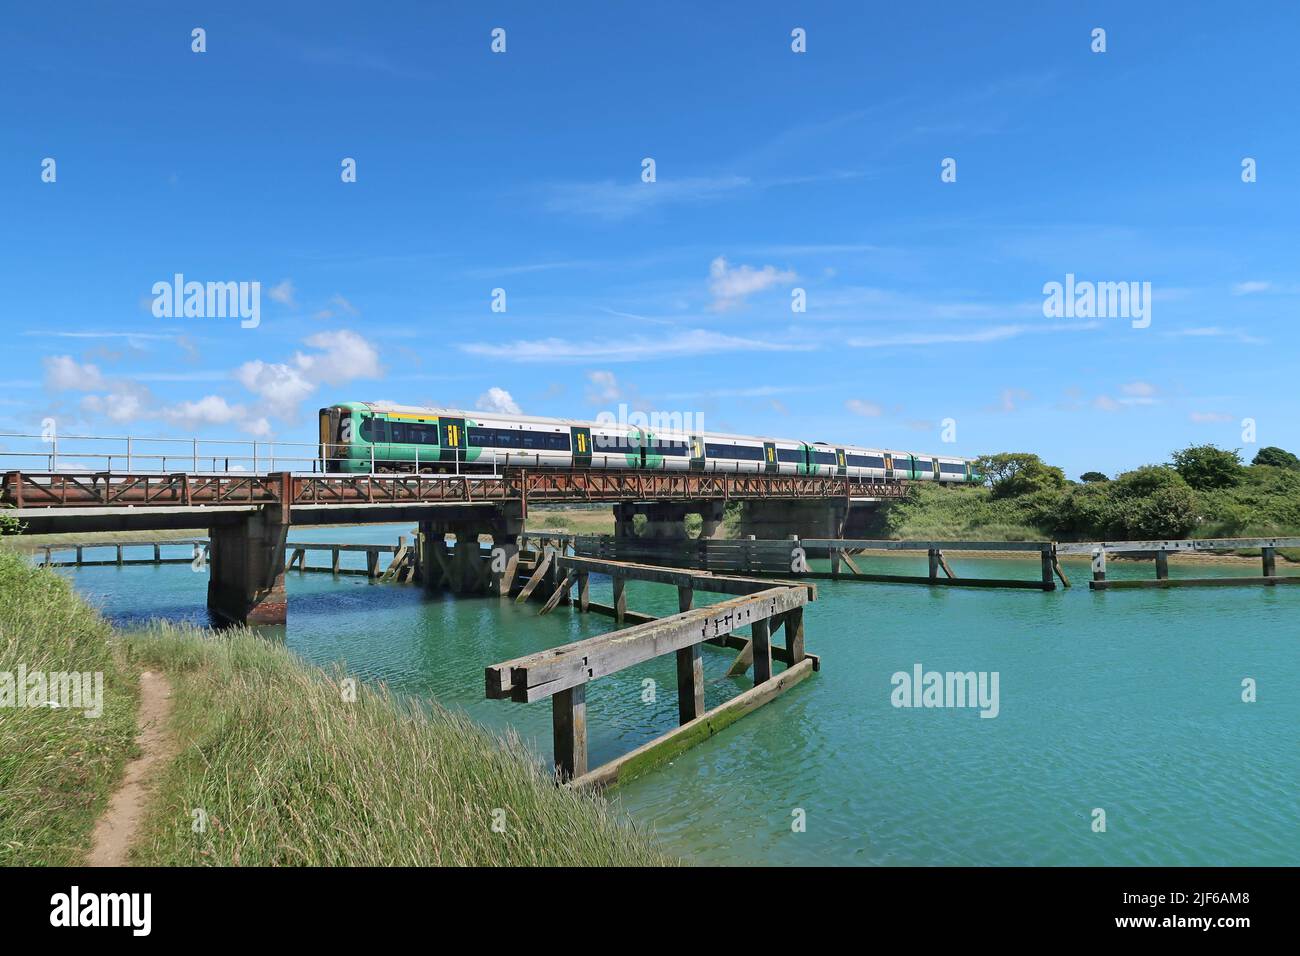 A Southern passenger train crosses the River Arun at Ford, near Littlehampton, West Sussex. Shows remains of timber jetty in foreground. Stock Photo